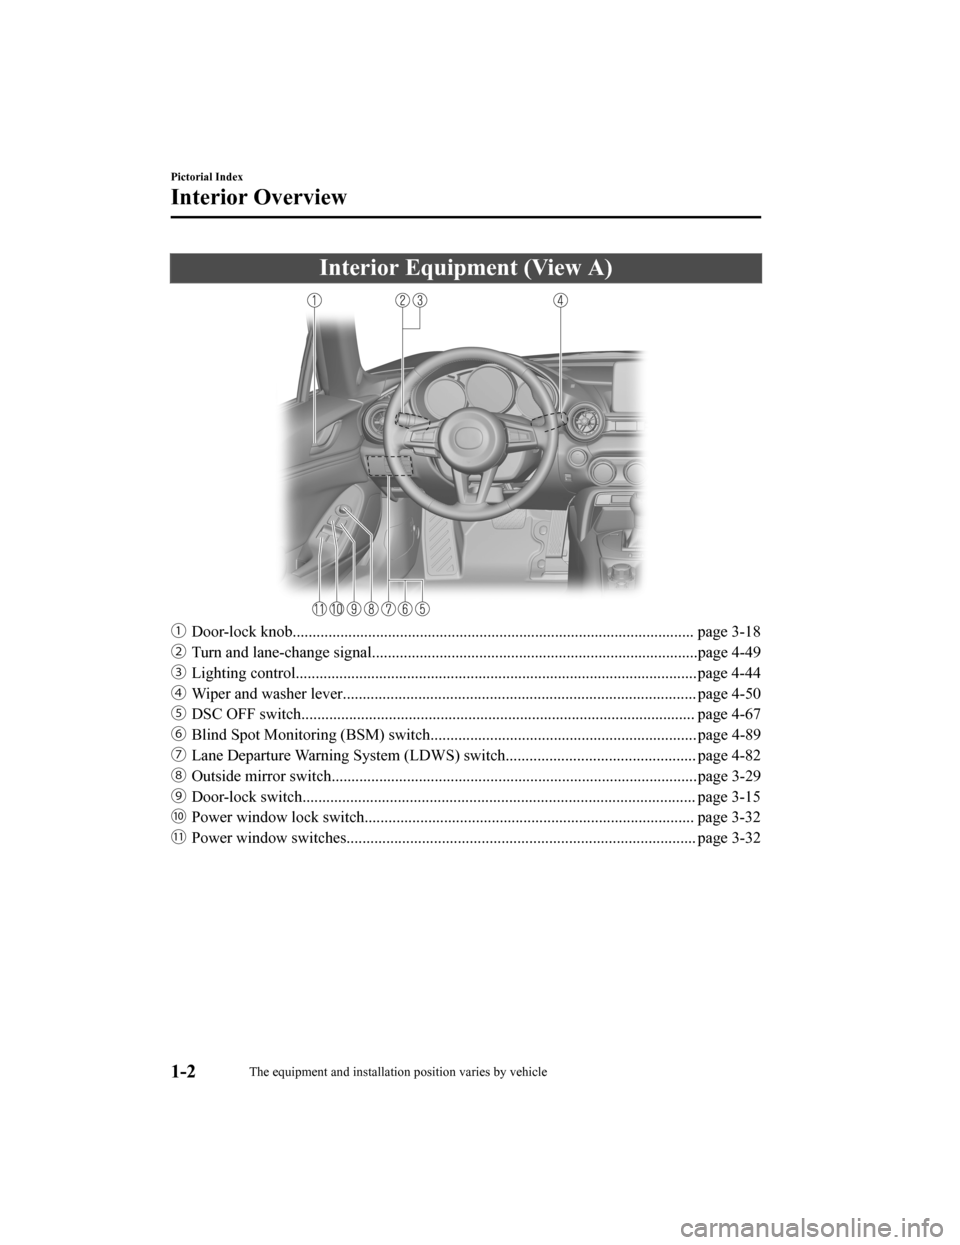 MAZDA MODEL MX-5 2018  Owners Manual (in English) Interior Equipment (View A)
ƒDoor-lock knob..................................................................................................... page 3-18
„ Turn and lane-change sig nal..........